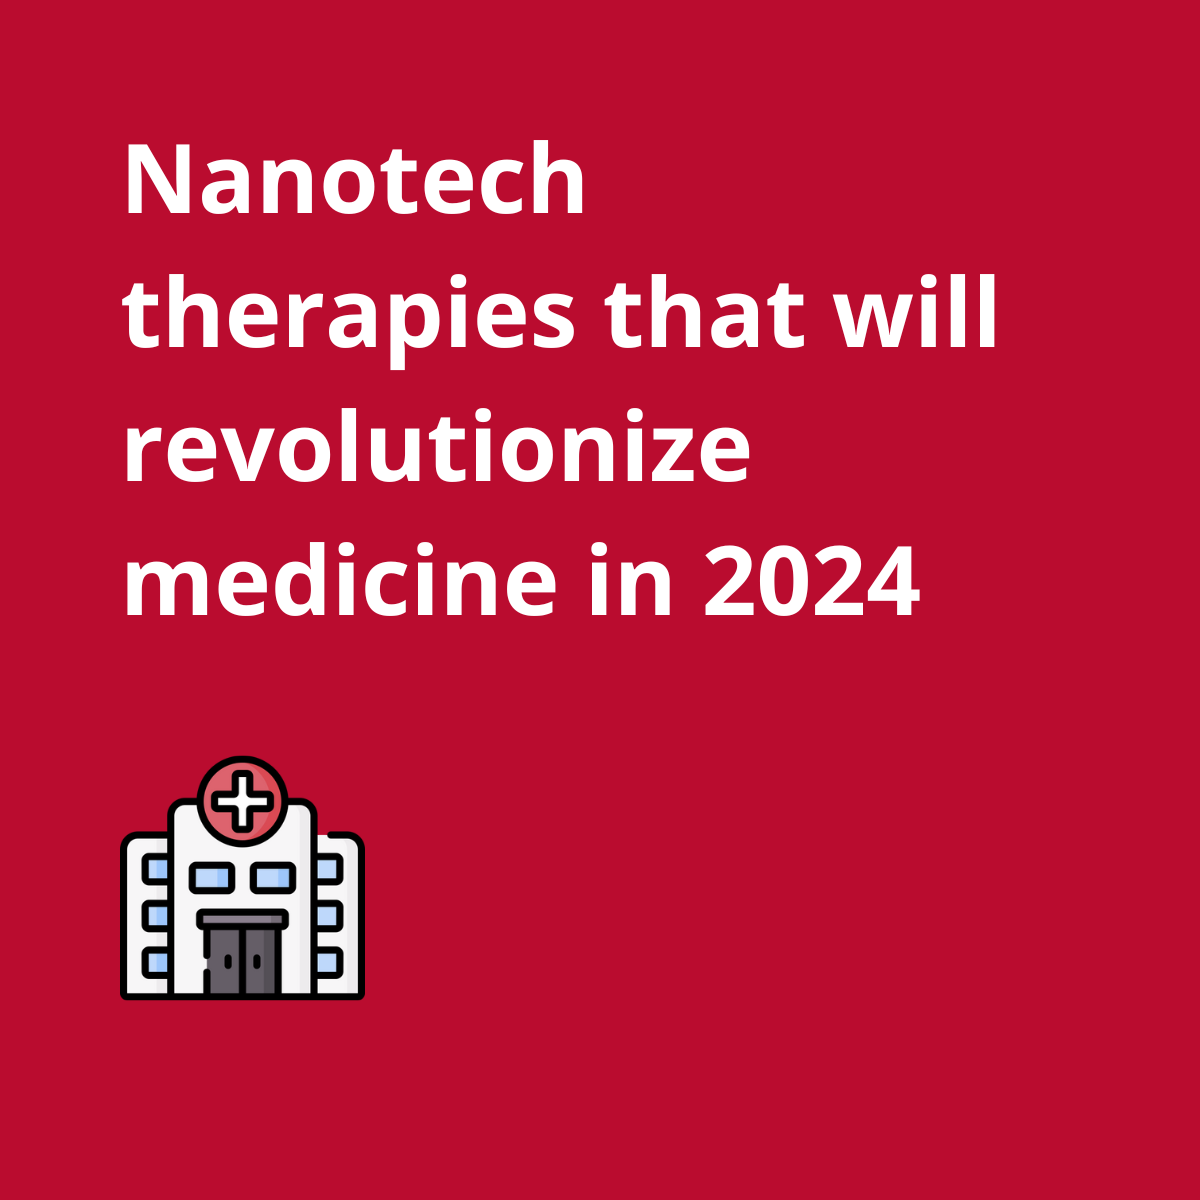 Nanotech-based therapies that will revolutionize the medical field in 2024